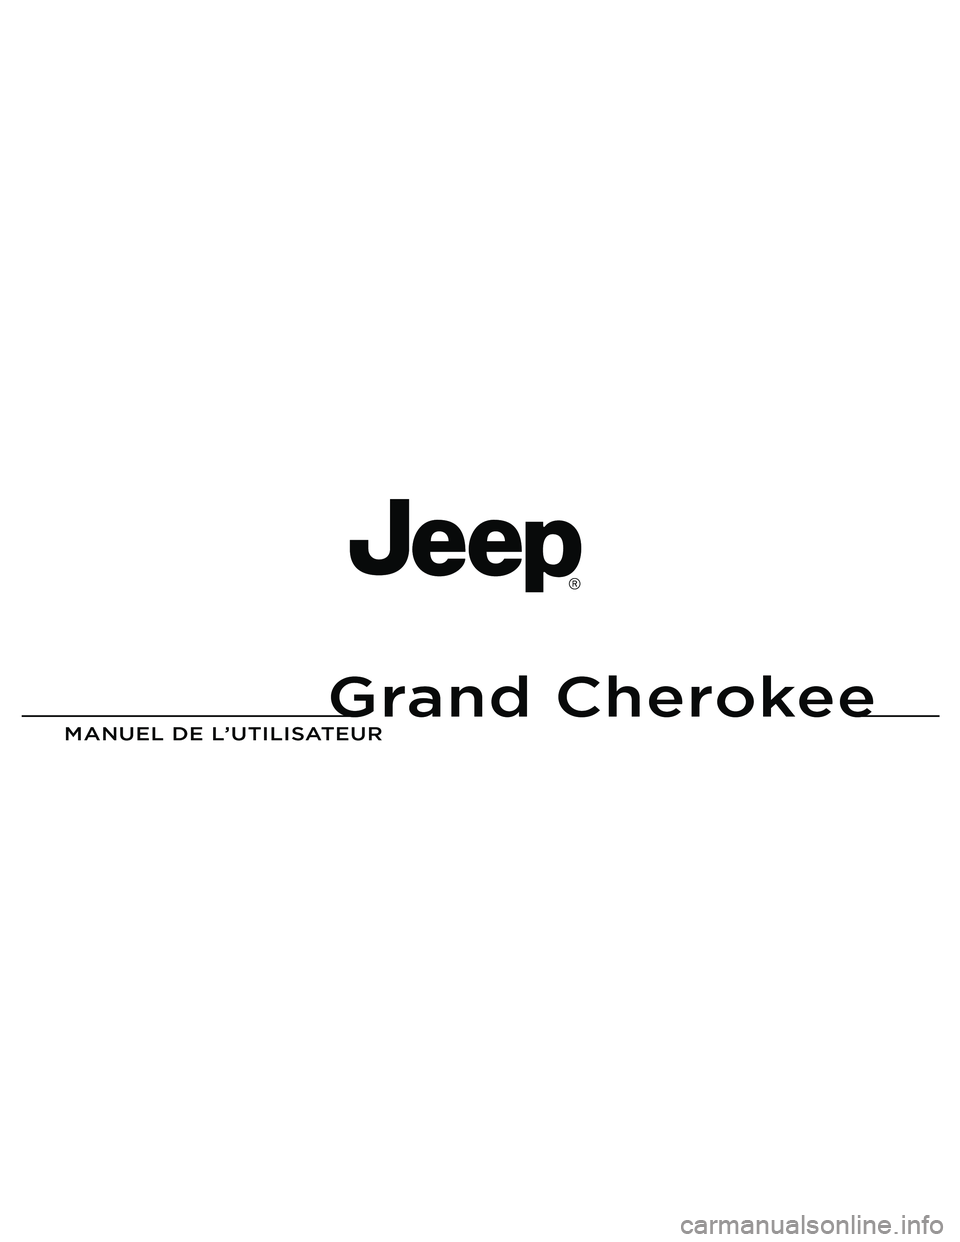 JEEP GRAND CHEROKEE 2010  Notice dentretien (in French) 